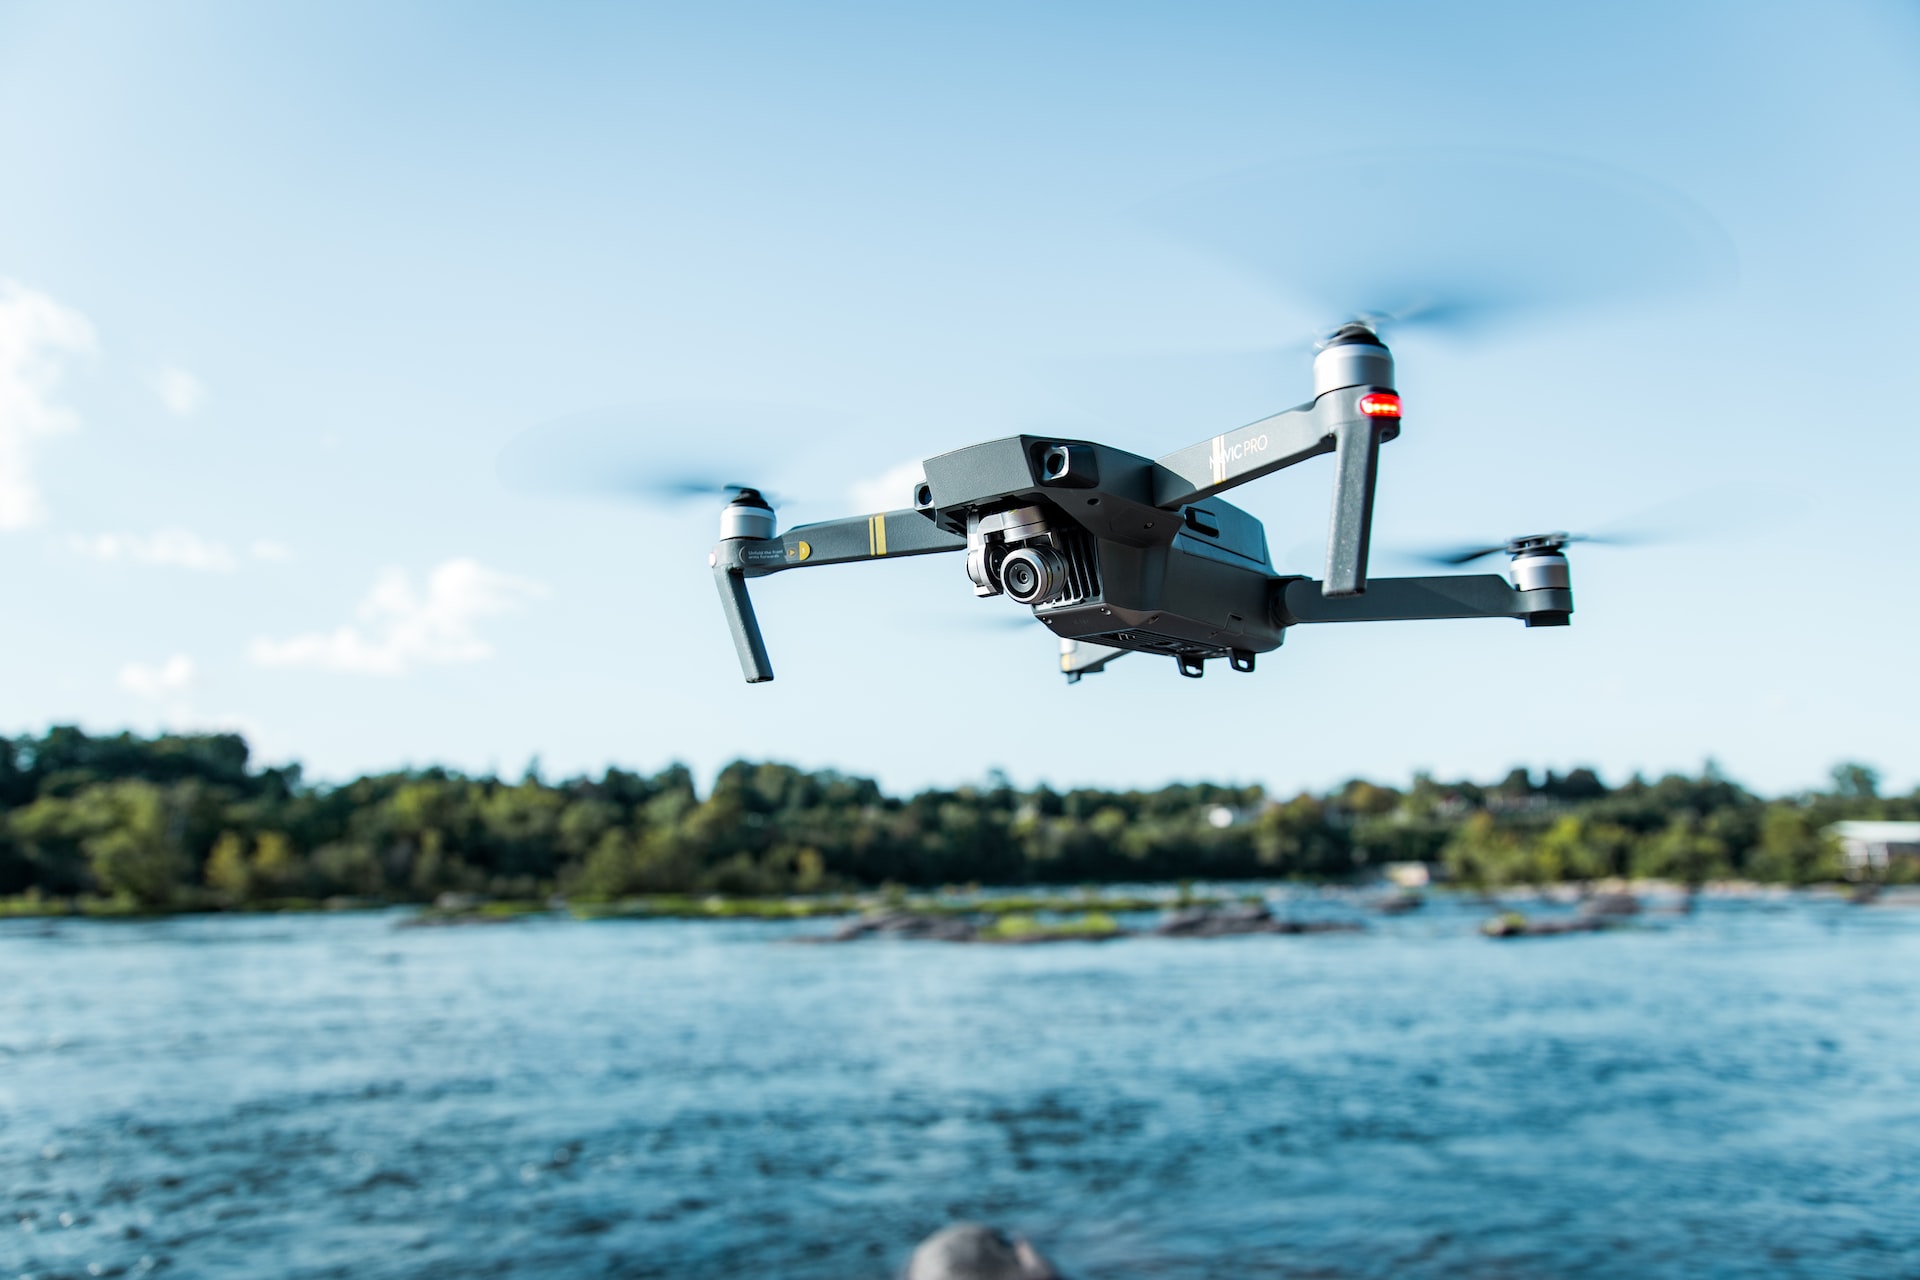 The Global Market for Commercial and Consumer Drones: Opportunities and Challenges